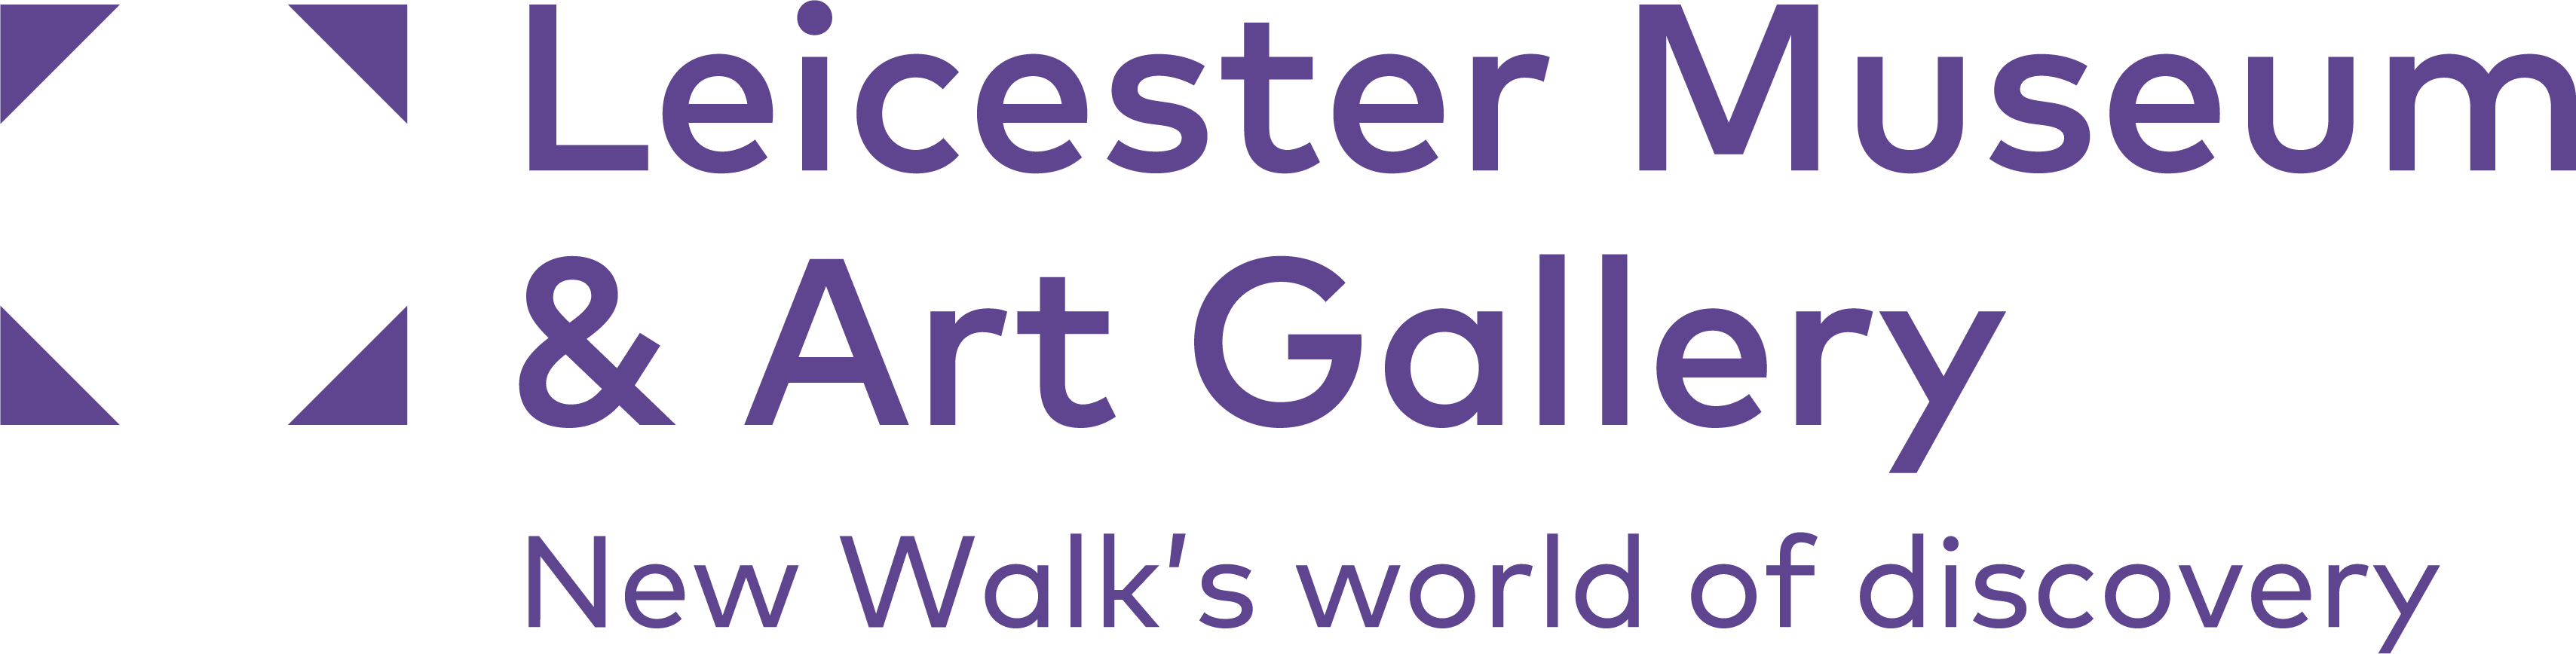 Leicester Museums & Art Gallery logo